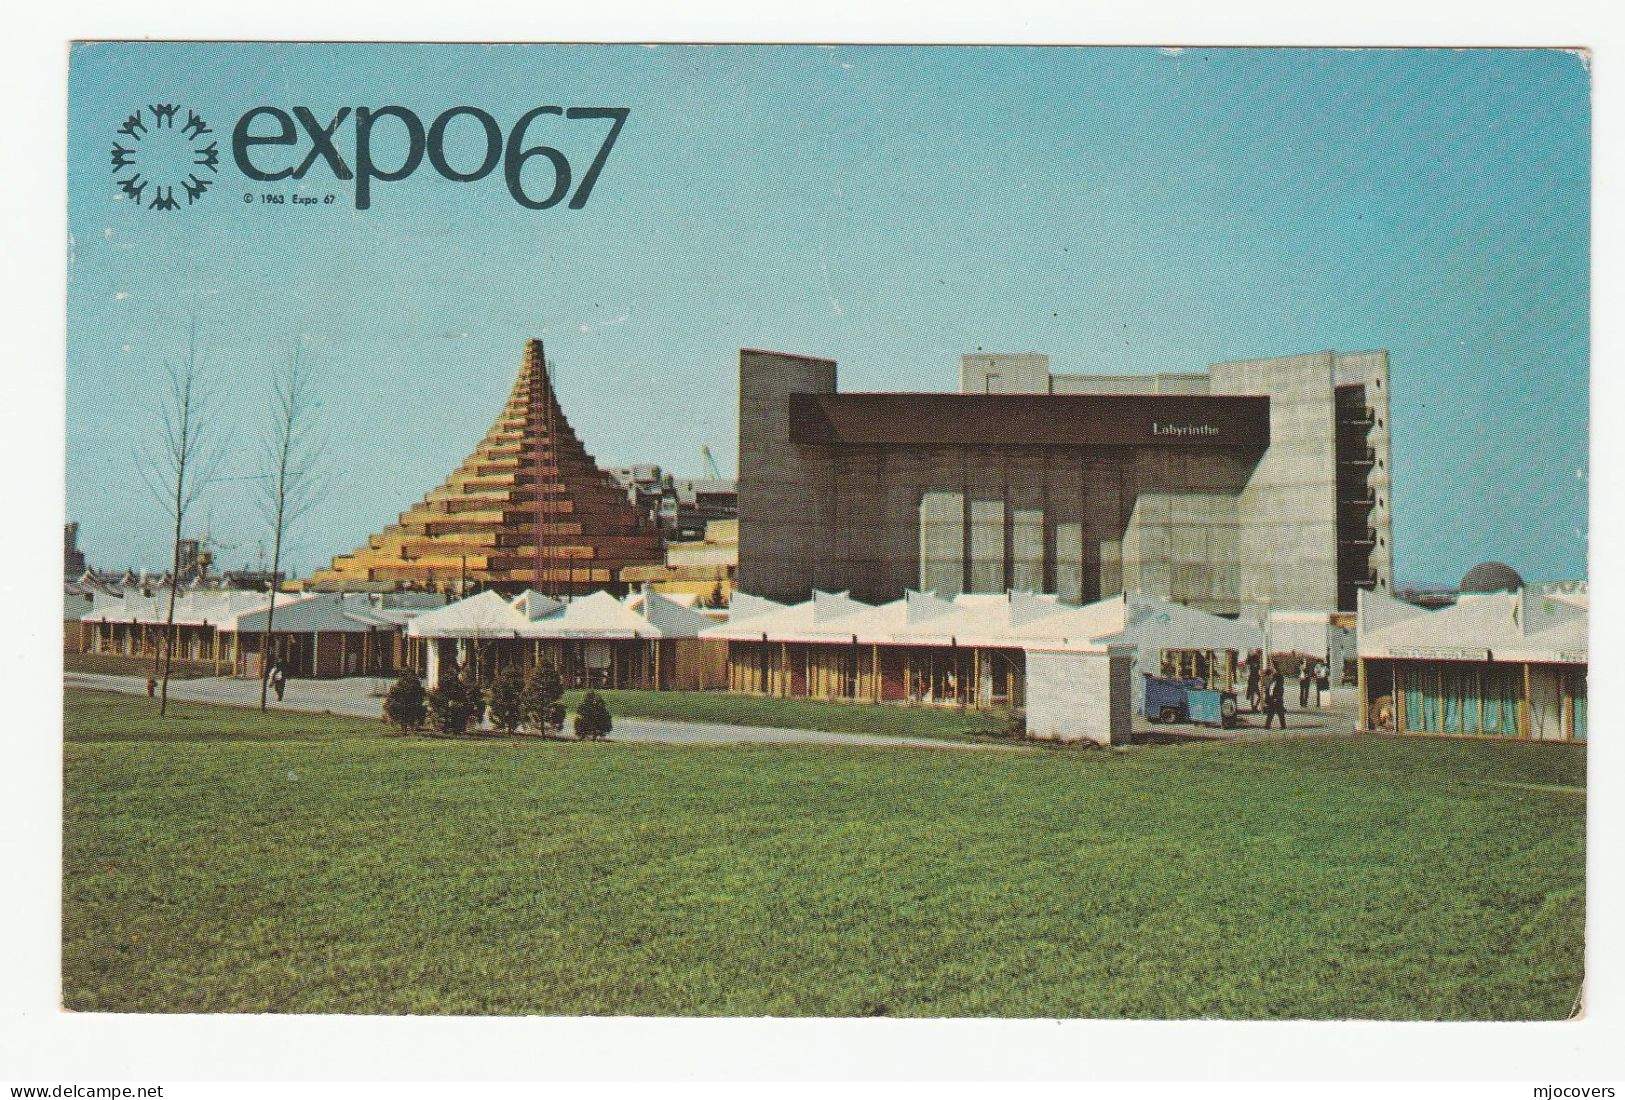 1967 EXPO  Postcard The Expo Labyrinth Mailed From The Exposition Pmk United Nations Expo  67 Canada , Un Stamps Cover - 1967 – Montréal (Canada)